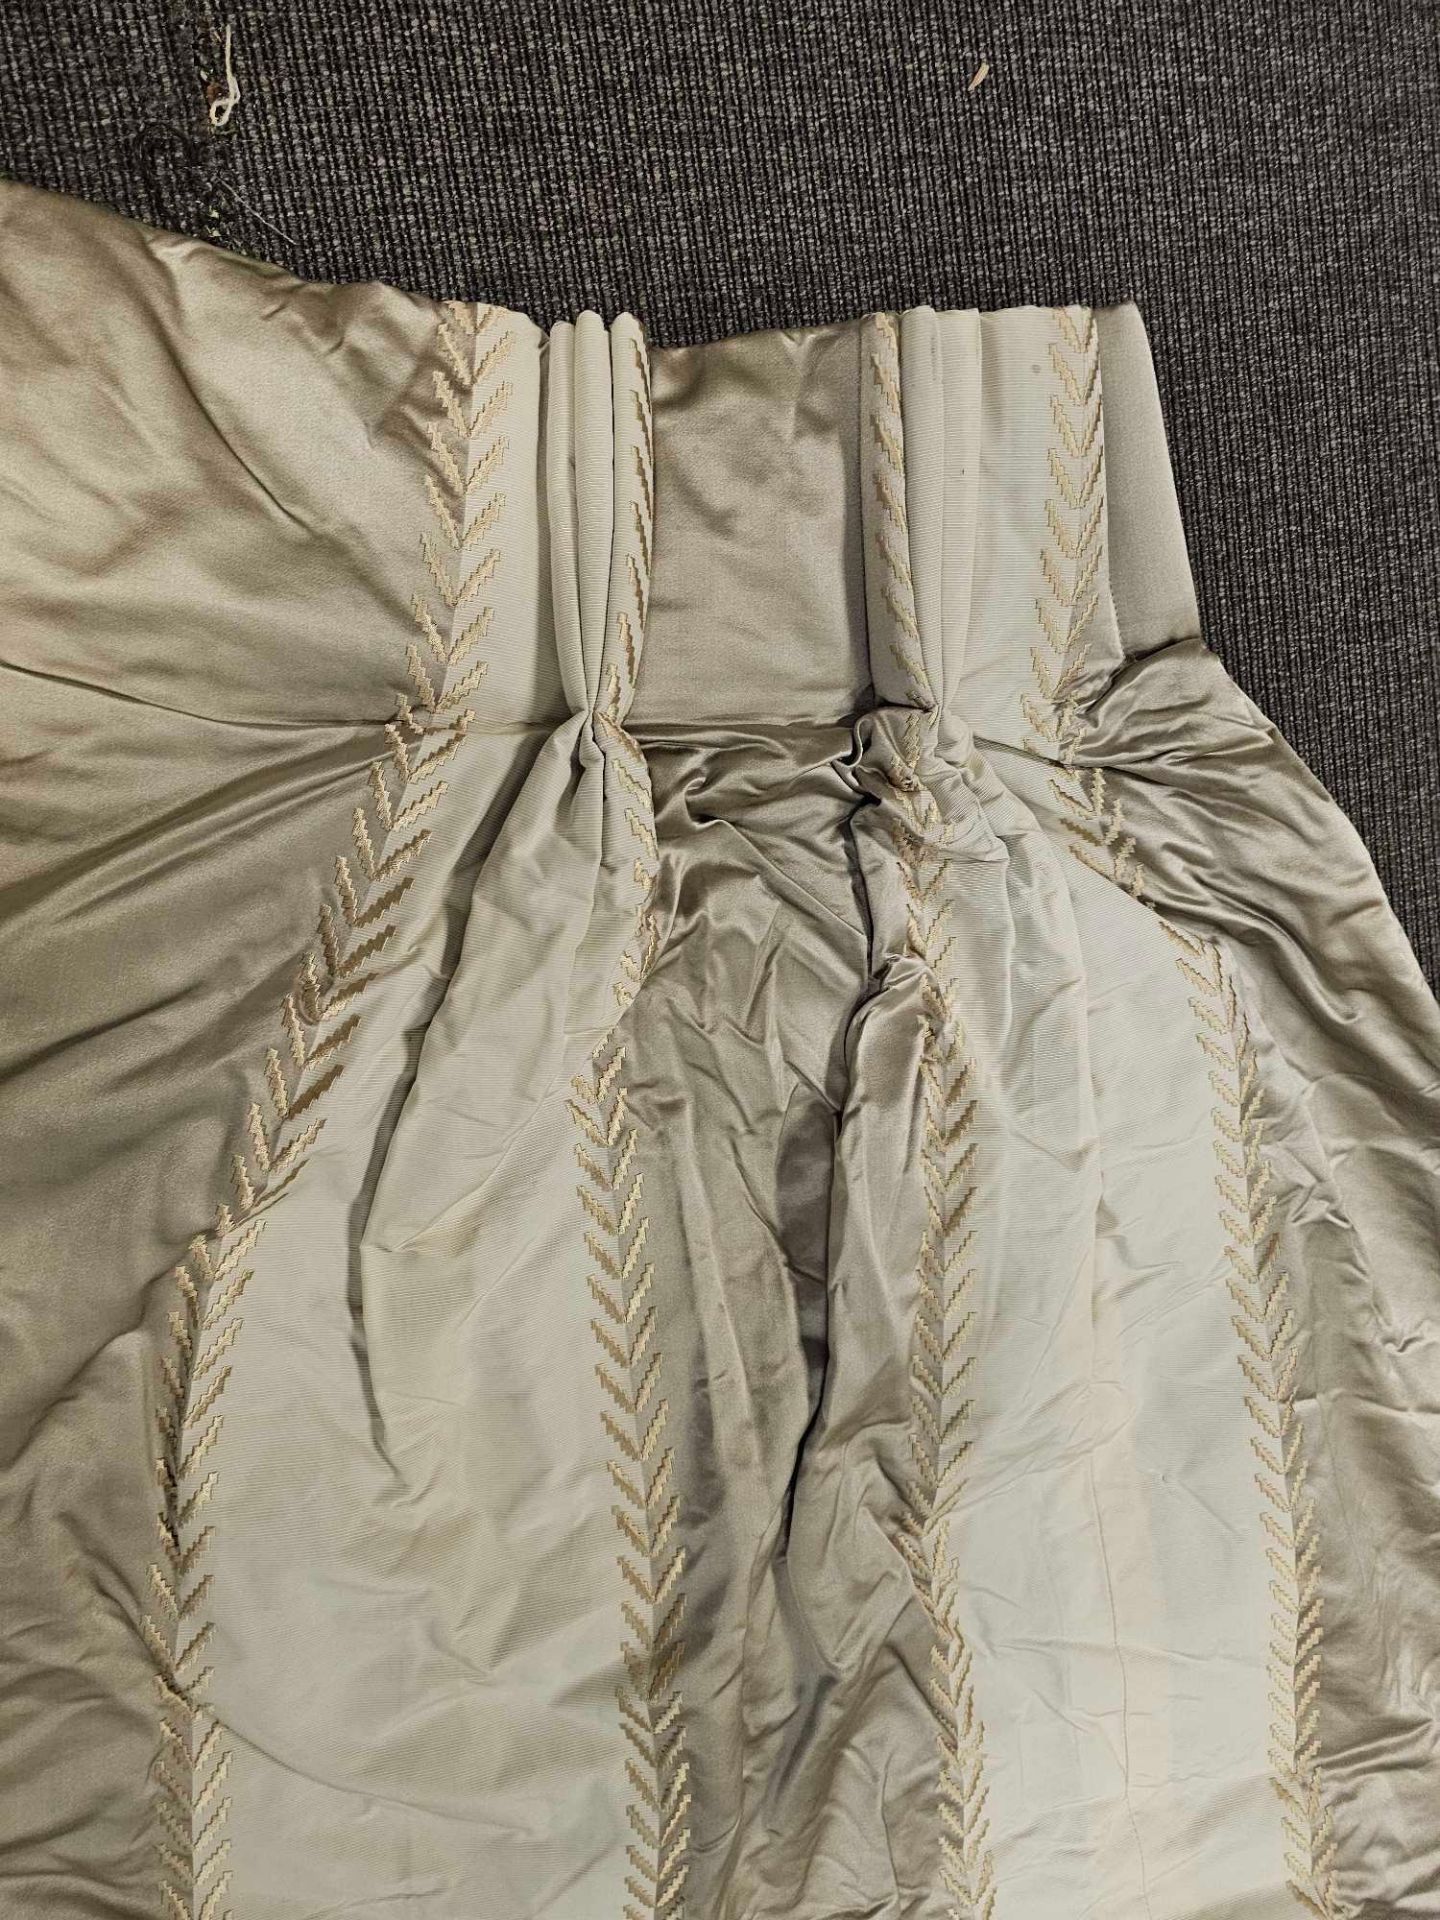 Single Cream And Silver Silk Drapes Brown Piping Arrow Pattern Size -cm 95 x 262 Ref Dorch 80 Single - Image 2 of 5